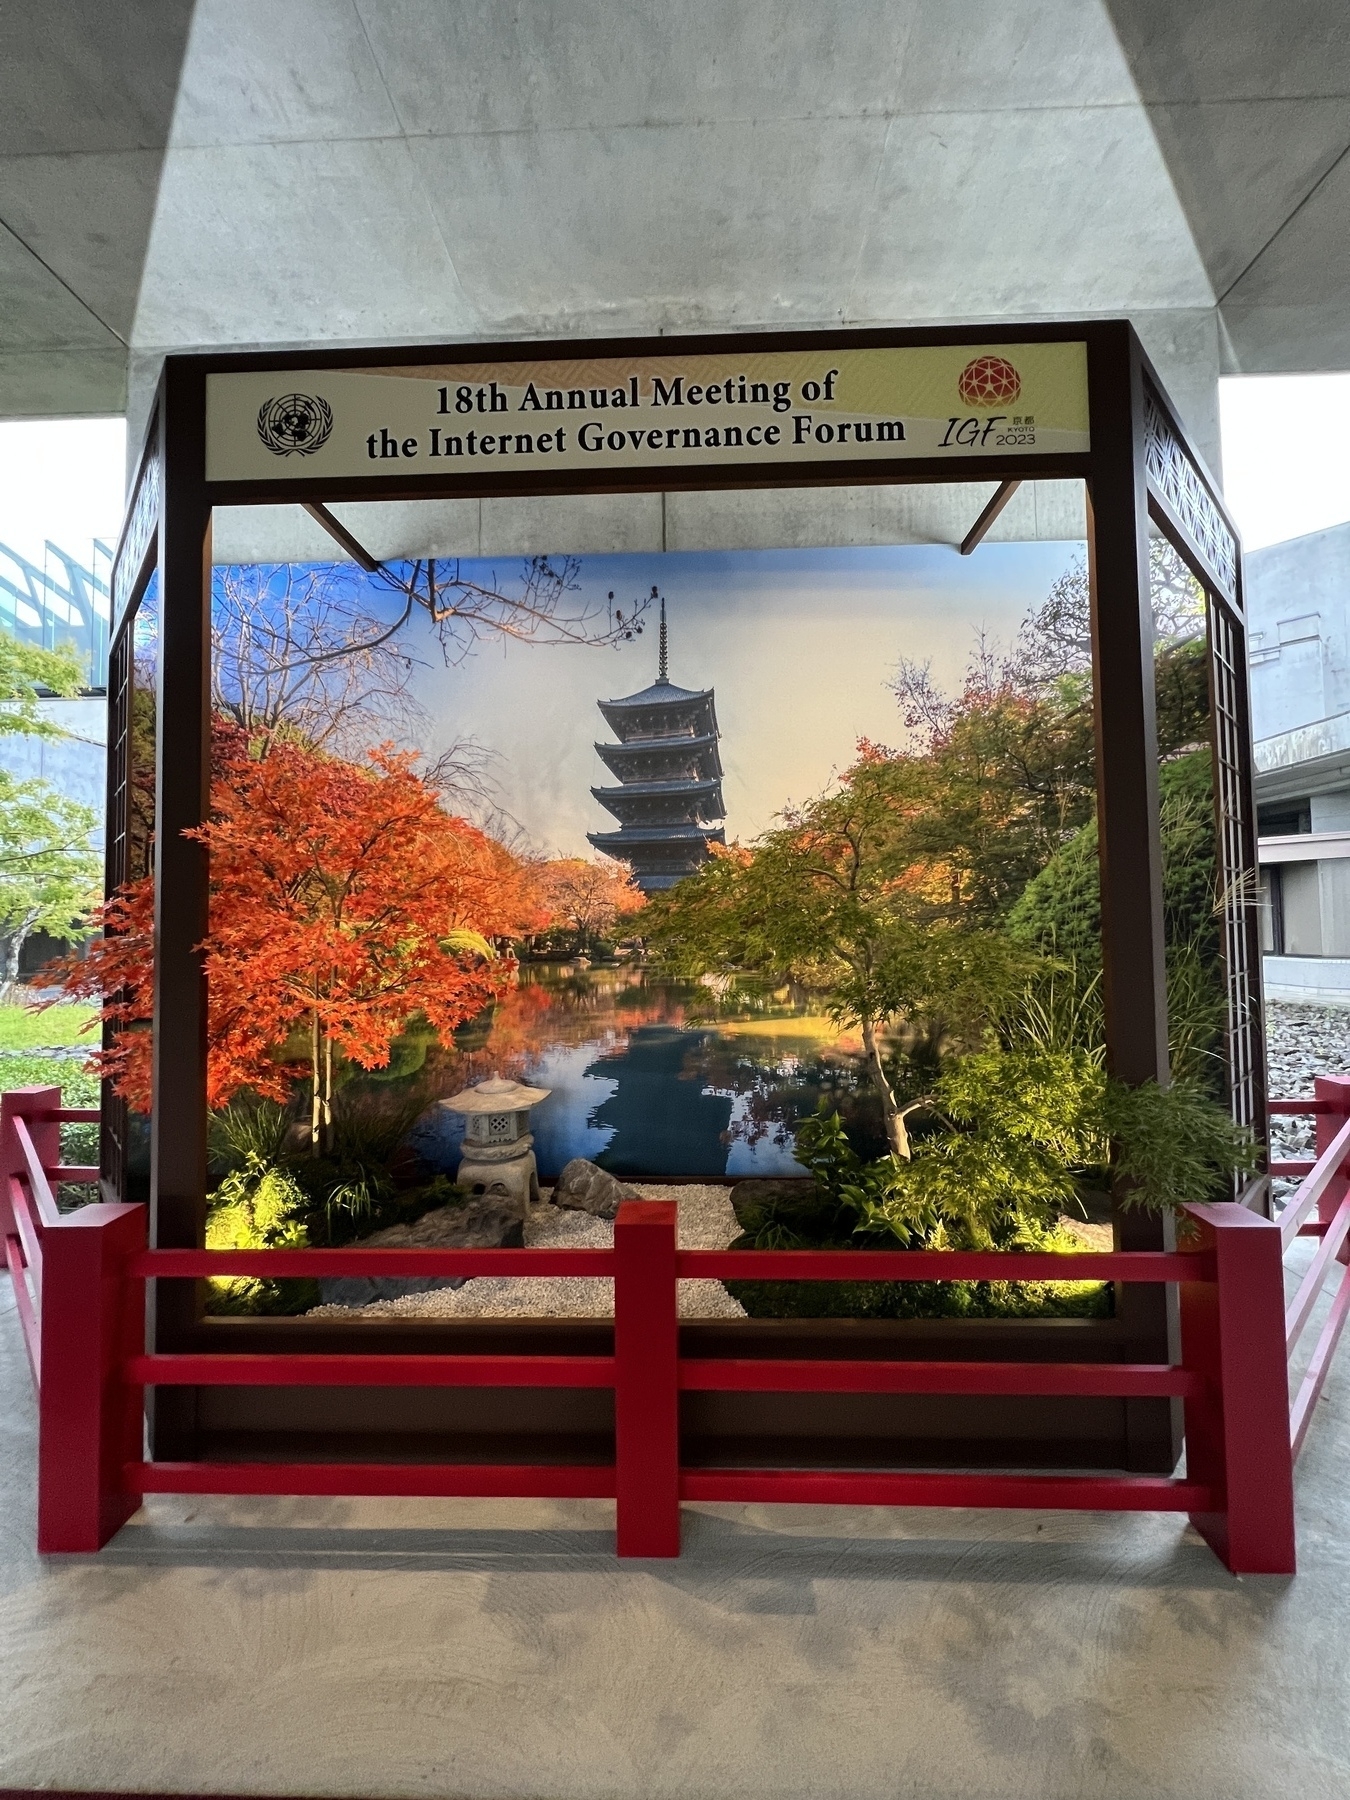 Entrance display featuring real maple trees arranged against a backdrop featuring a pagoda. Above is the sign “18th Annual Meeting of the Internet Governance Forum”